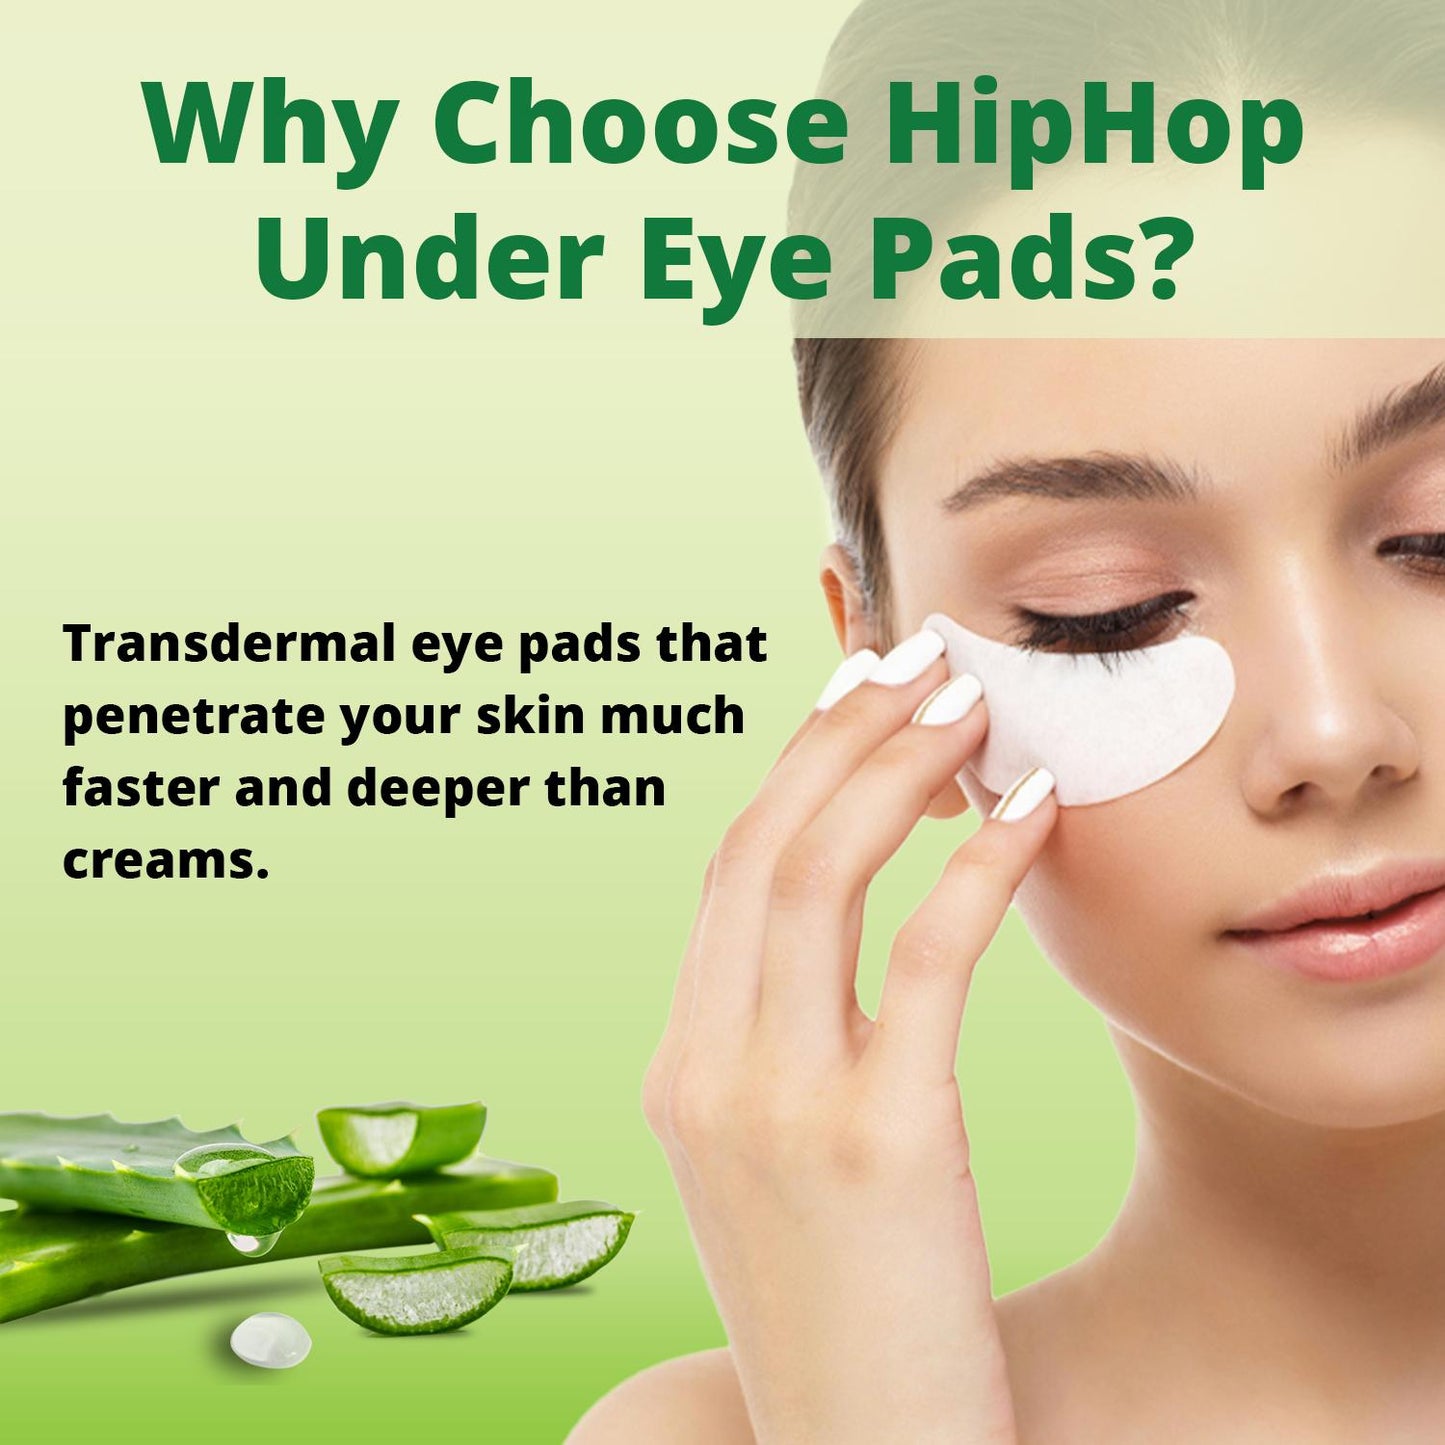 HipHop Under Eye Pads With Multivitamin Gel (5 Pairs)